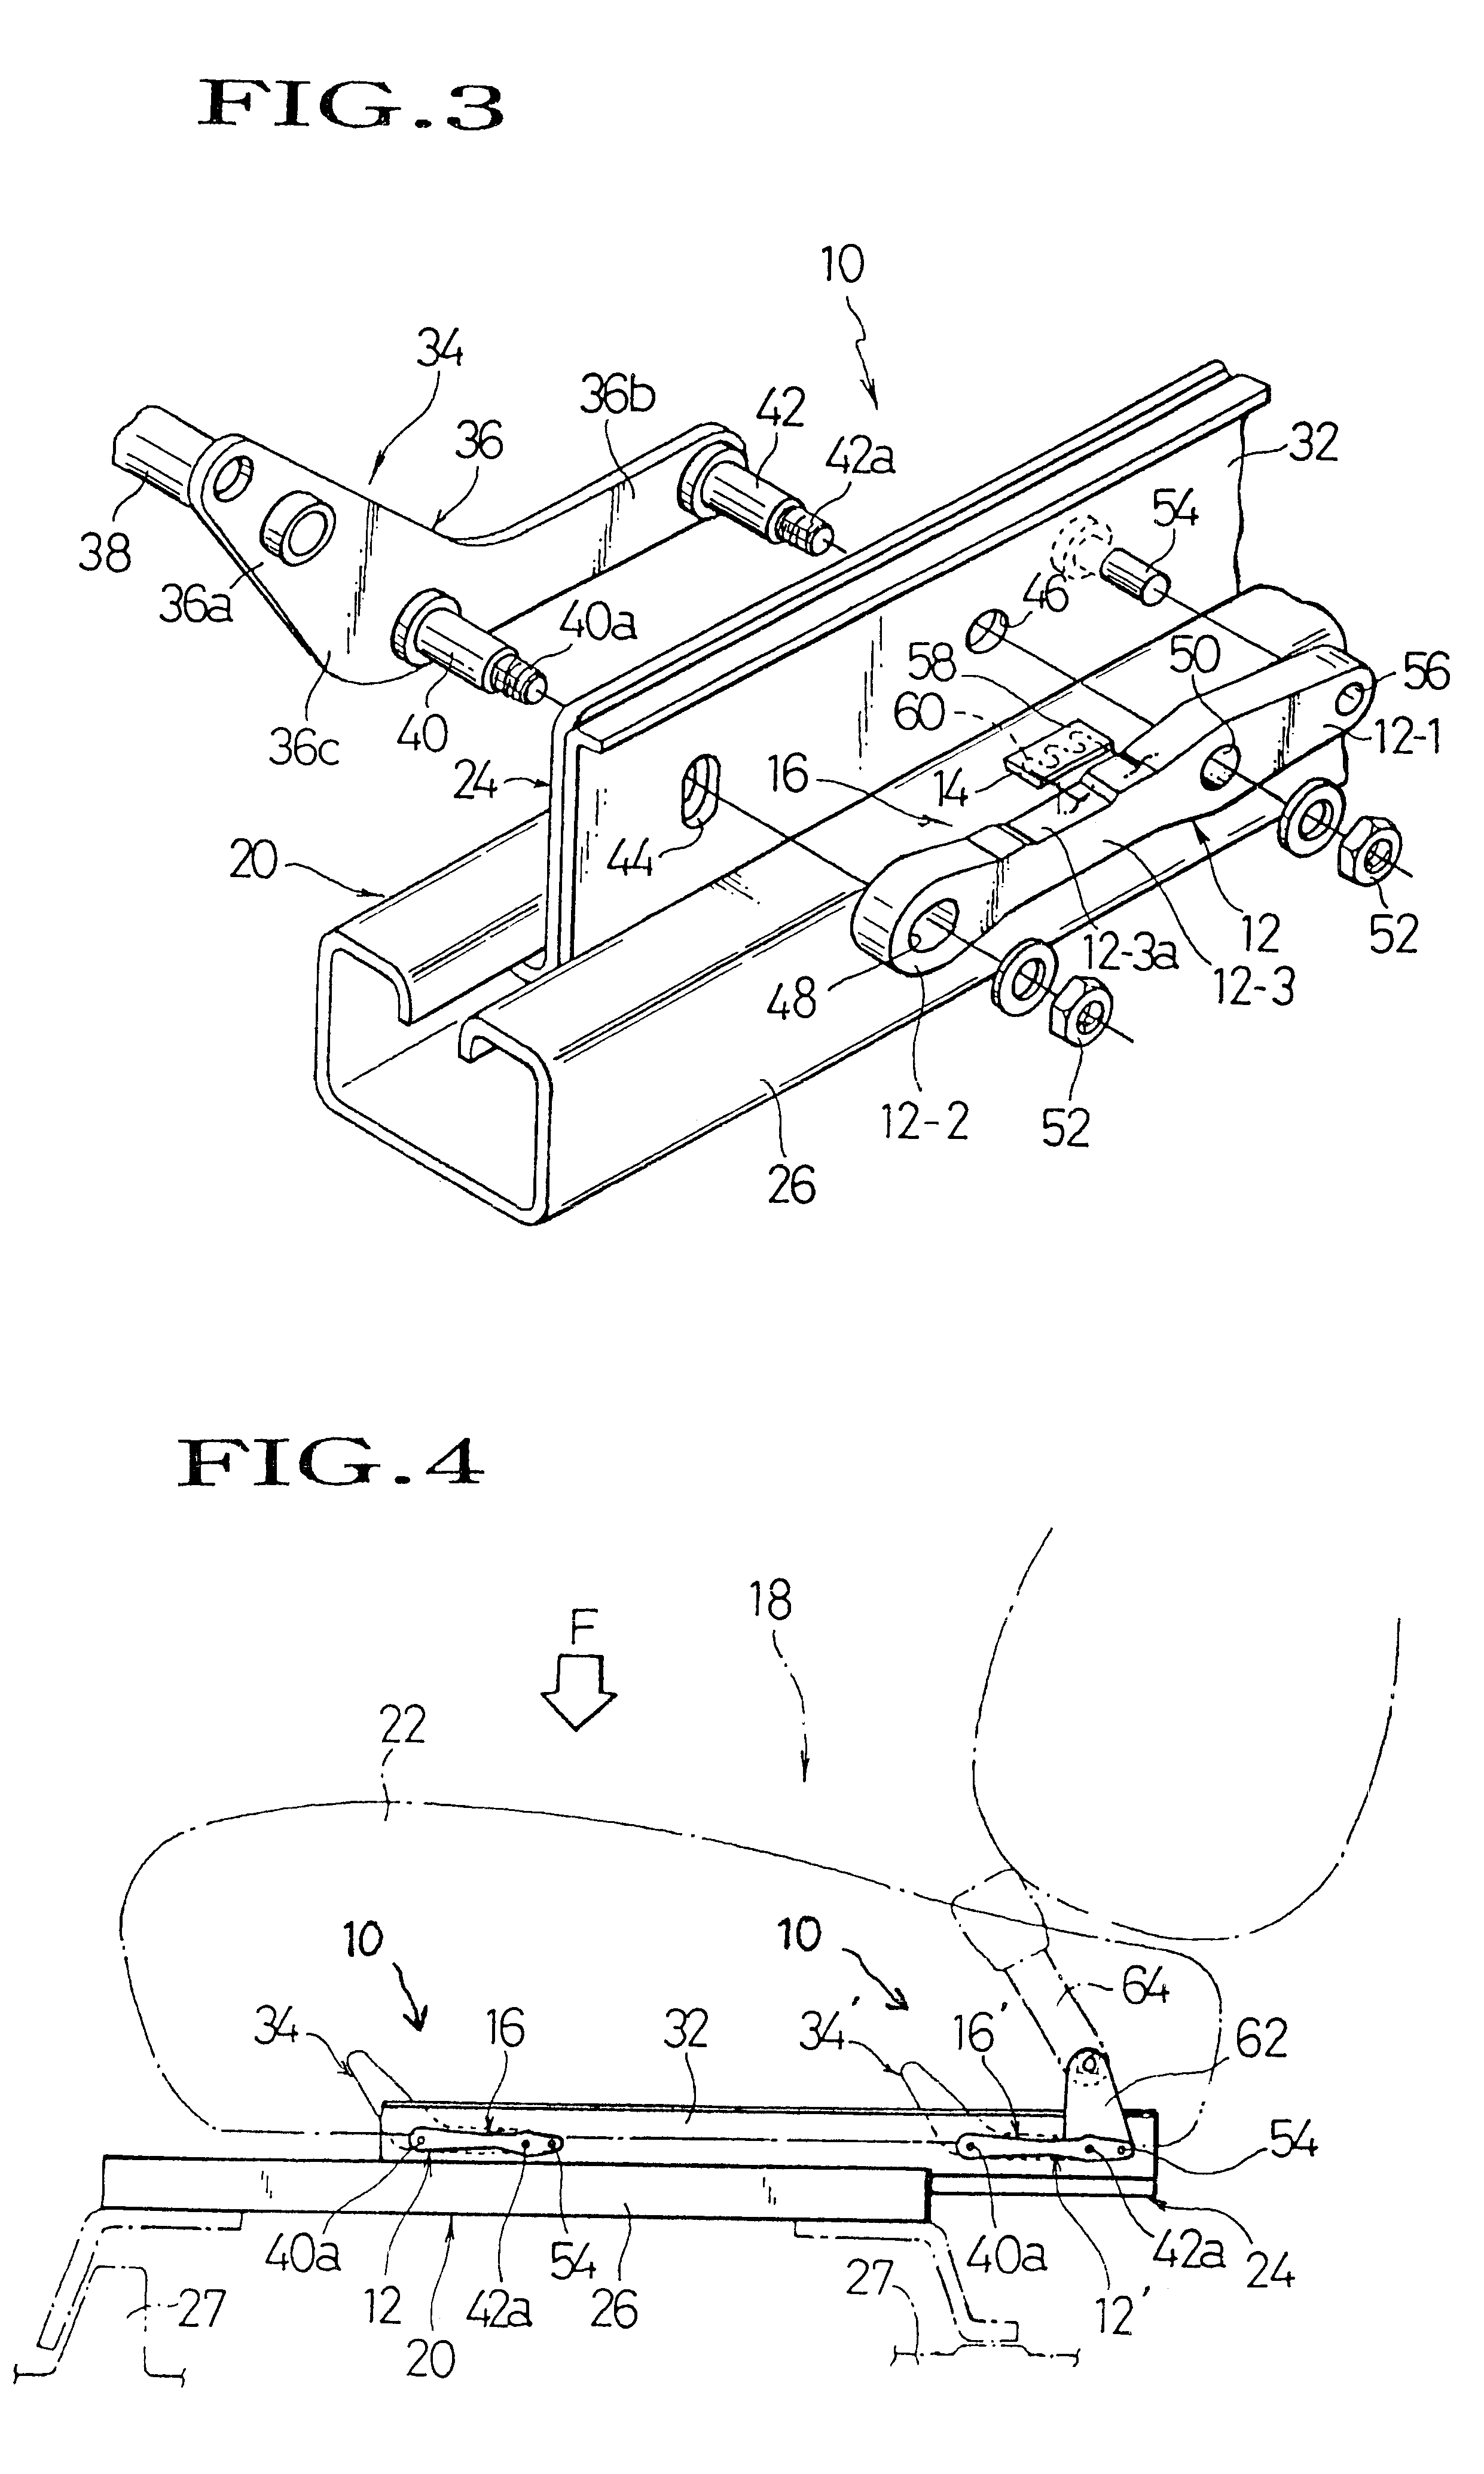 Load detection structure for vehicle seat